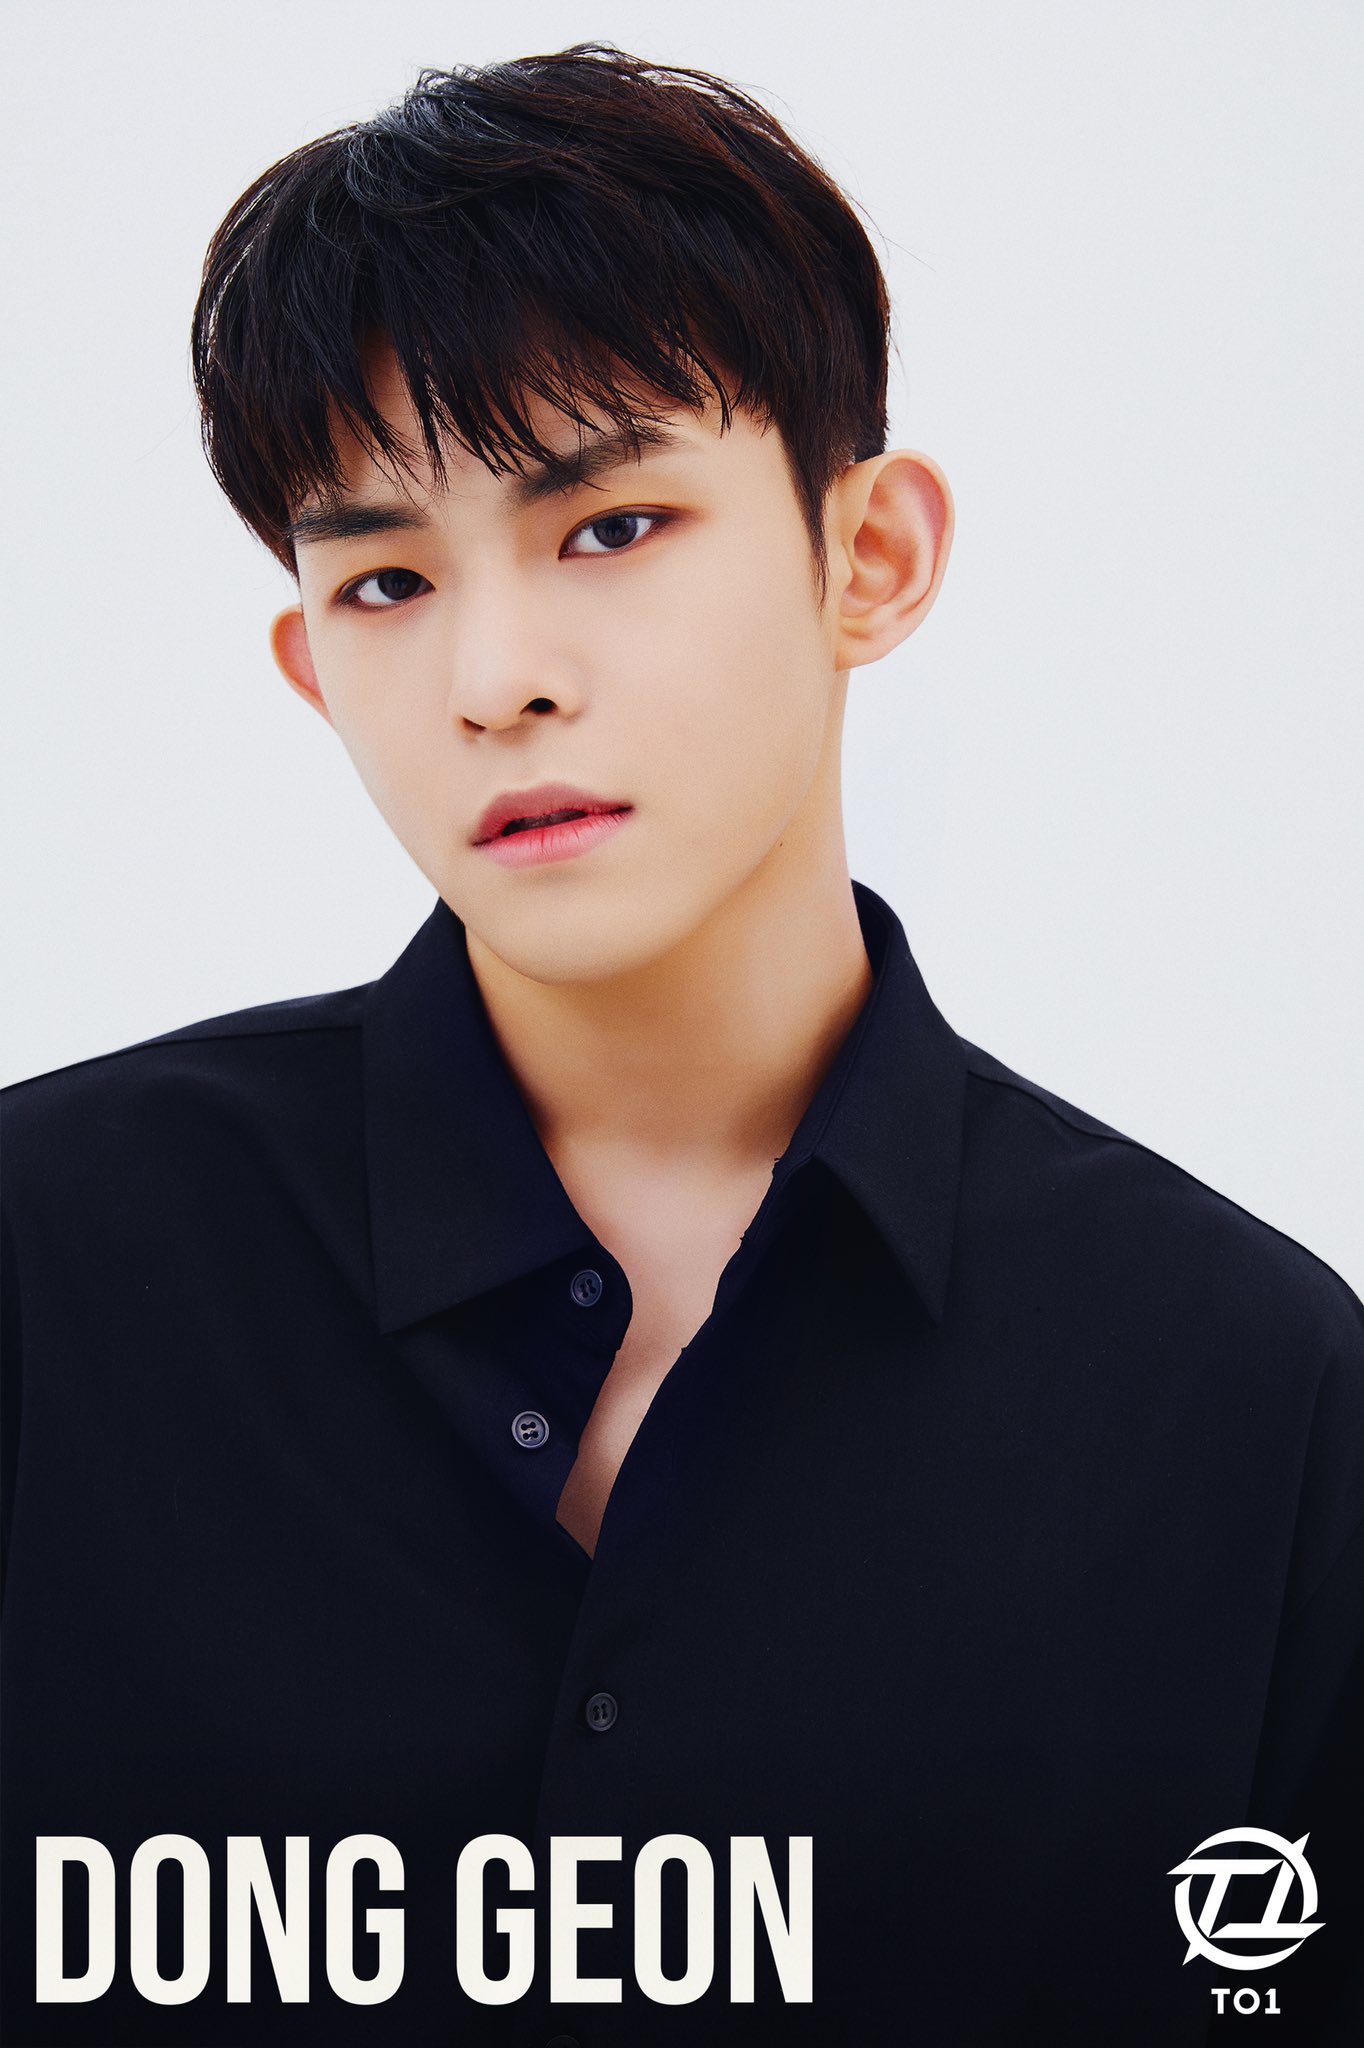 Donggeon (TO1 Member) Age, Bio, Wiki, Facts & More